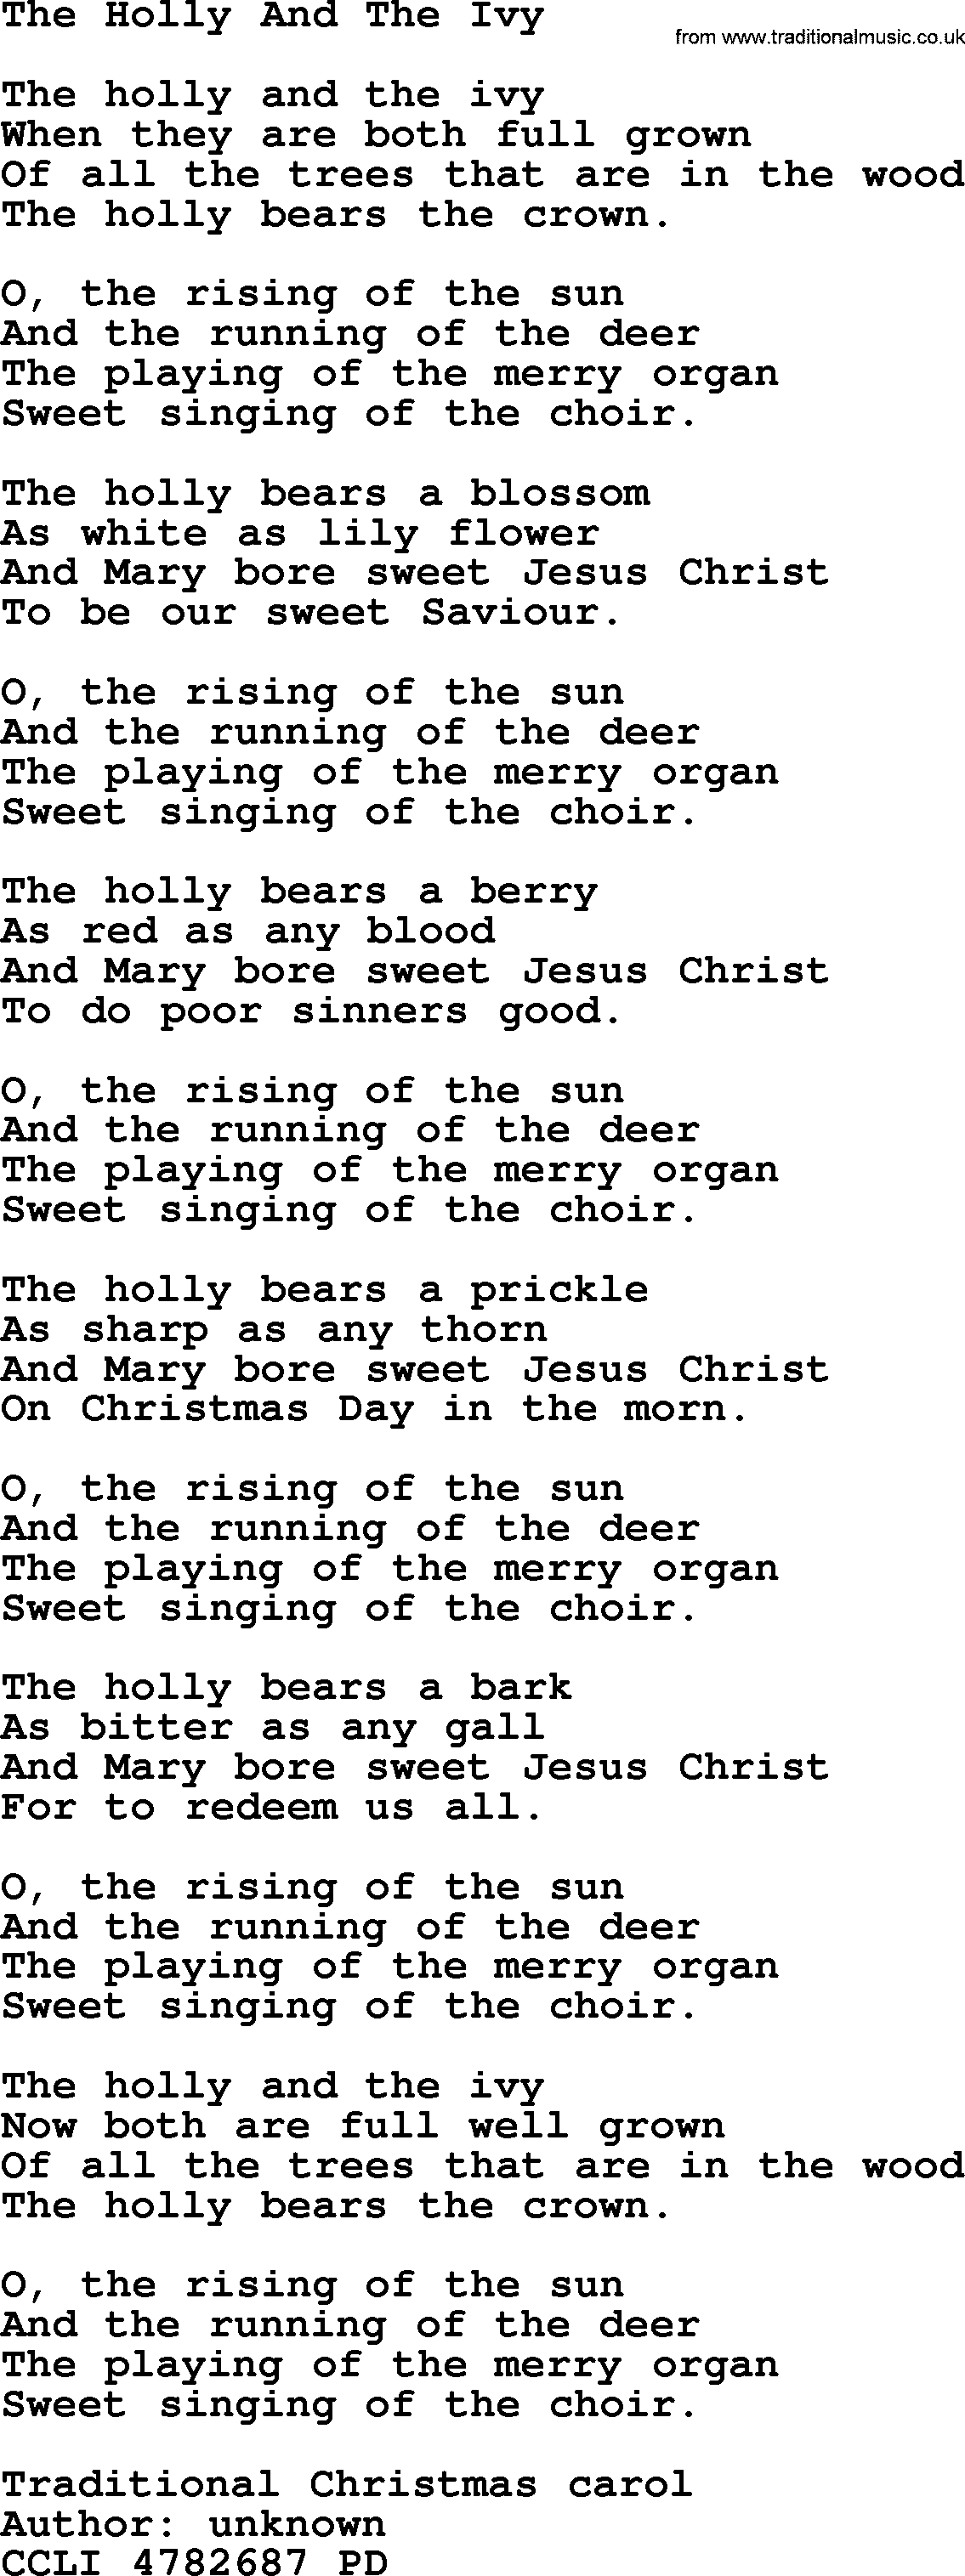 280 Christmas Hymns and songs with PowerPoints and PDF, title: The Holly And The Ivy, lyrics, PPT and PDF